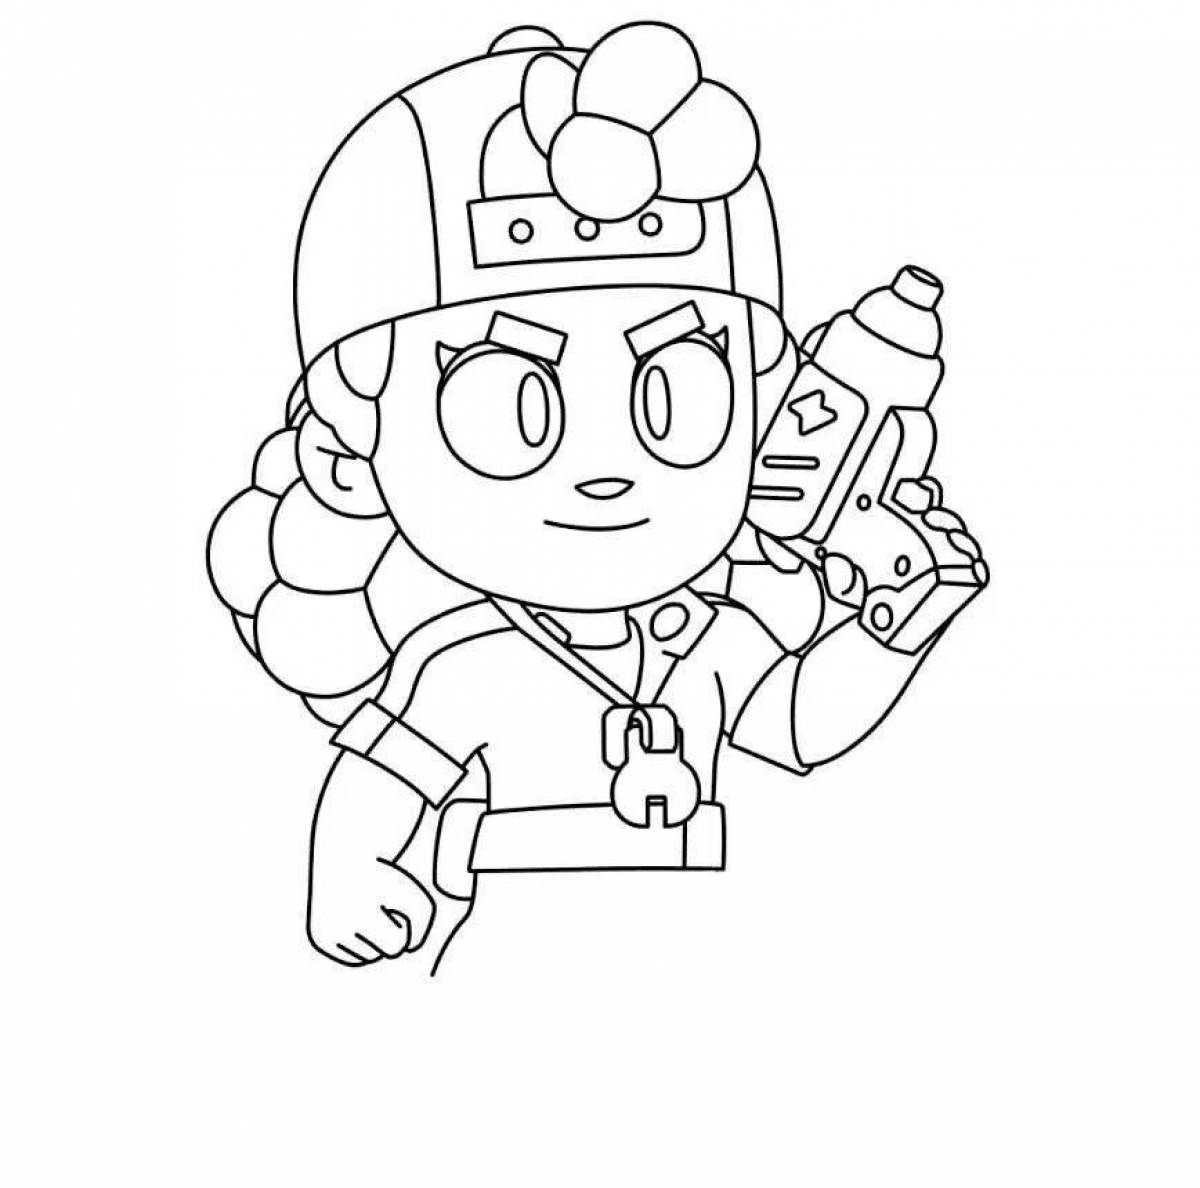 Animated brawl stars fan coloring page